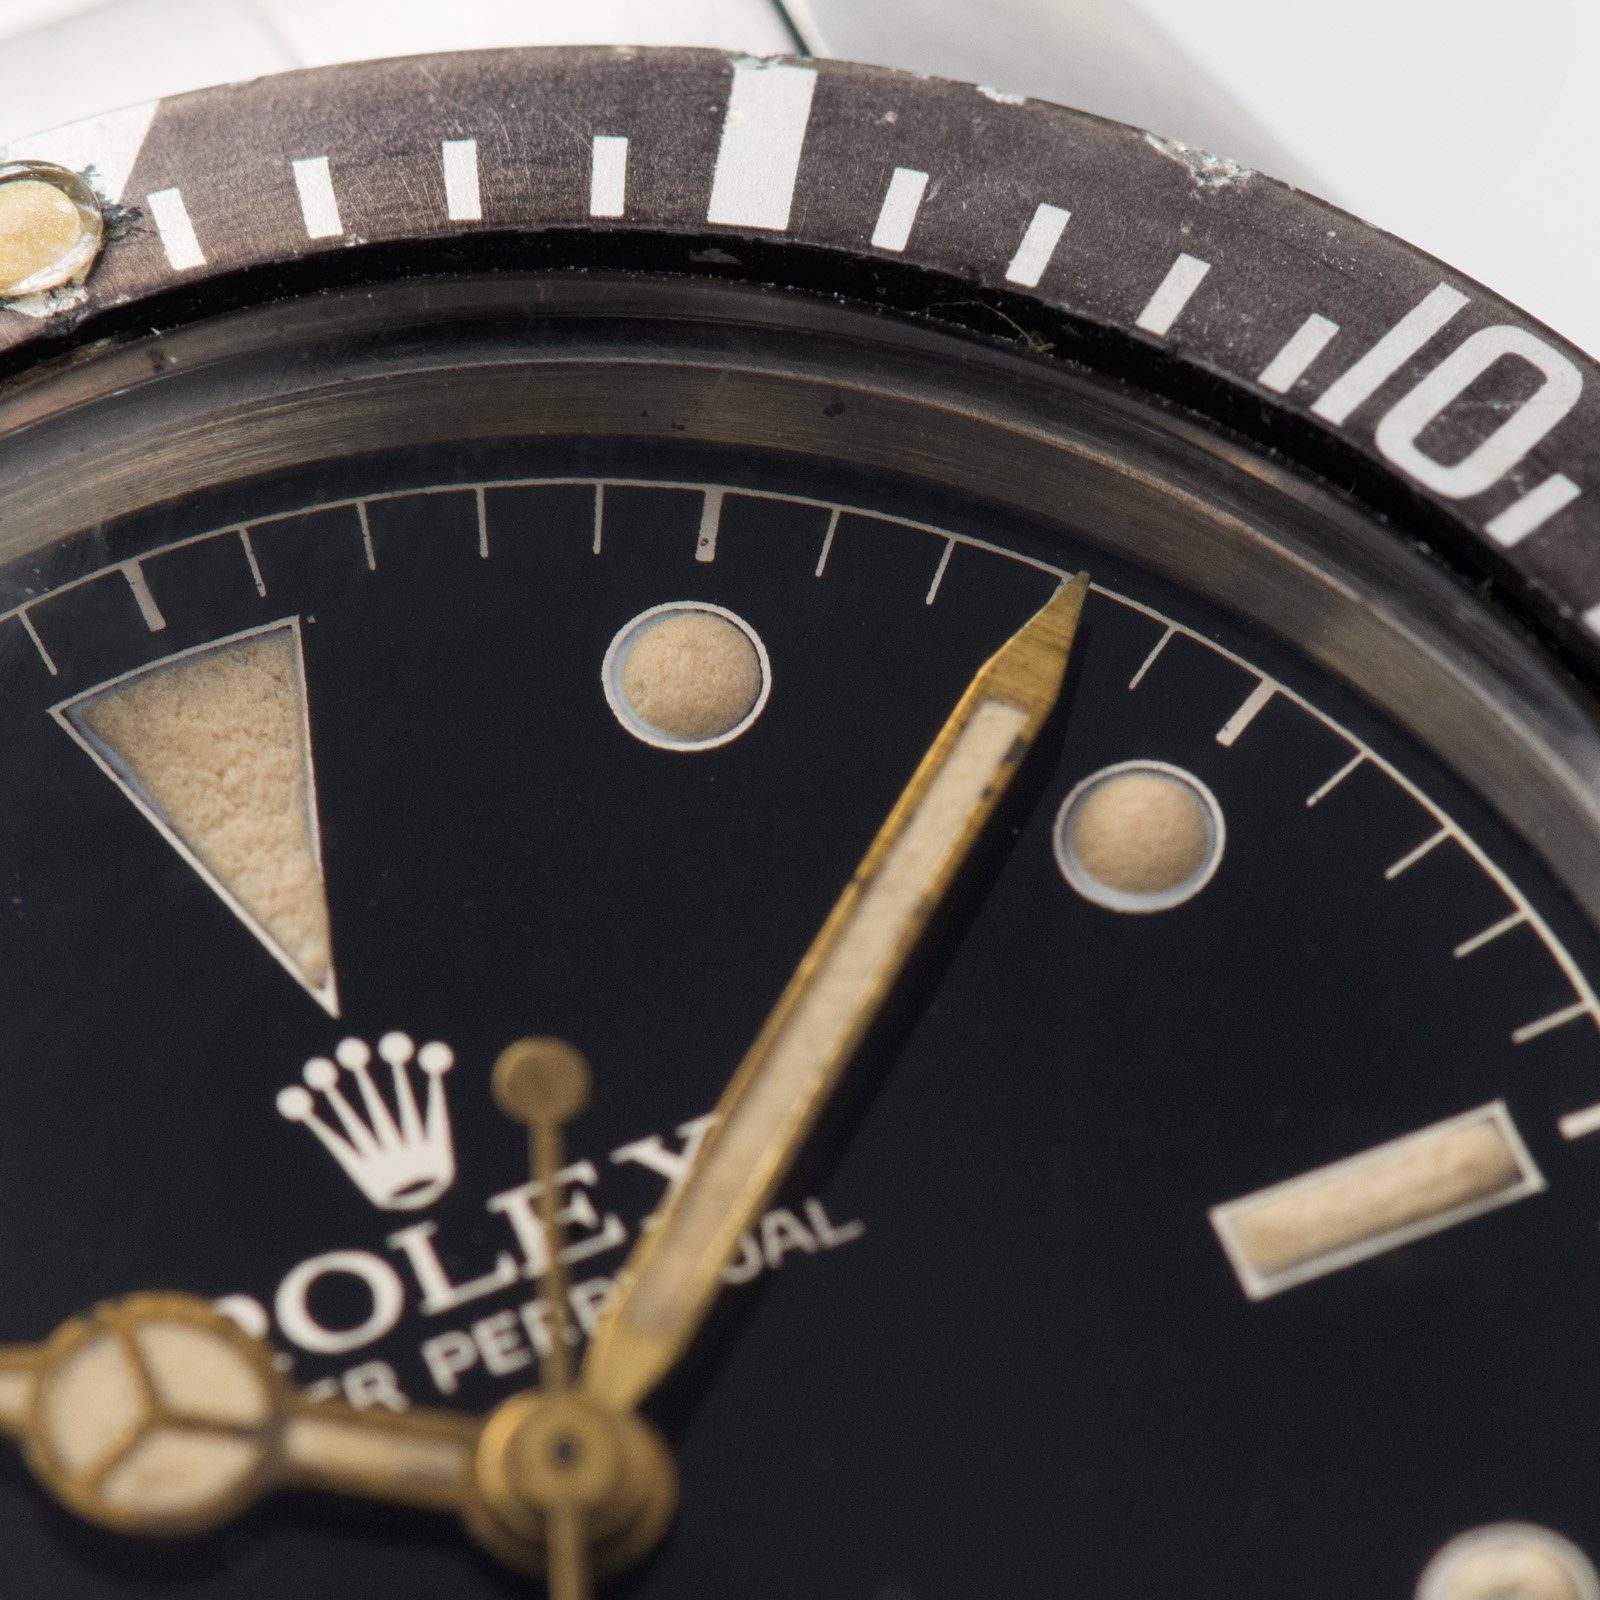 Rolex 5508 Small Crown Gilt Dial Submariner